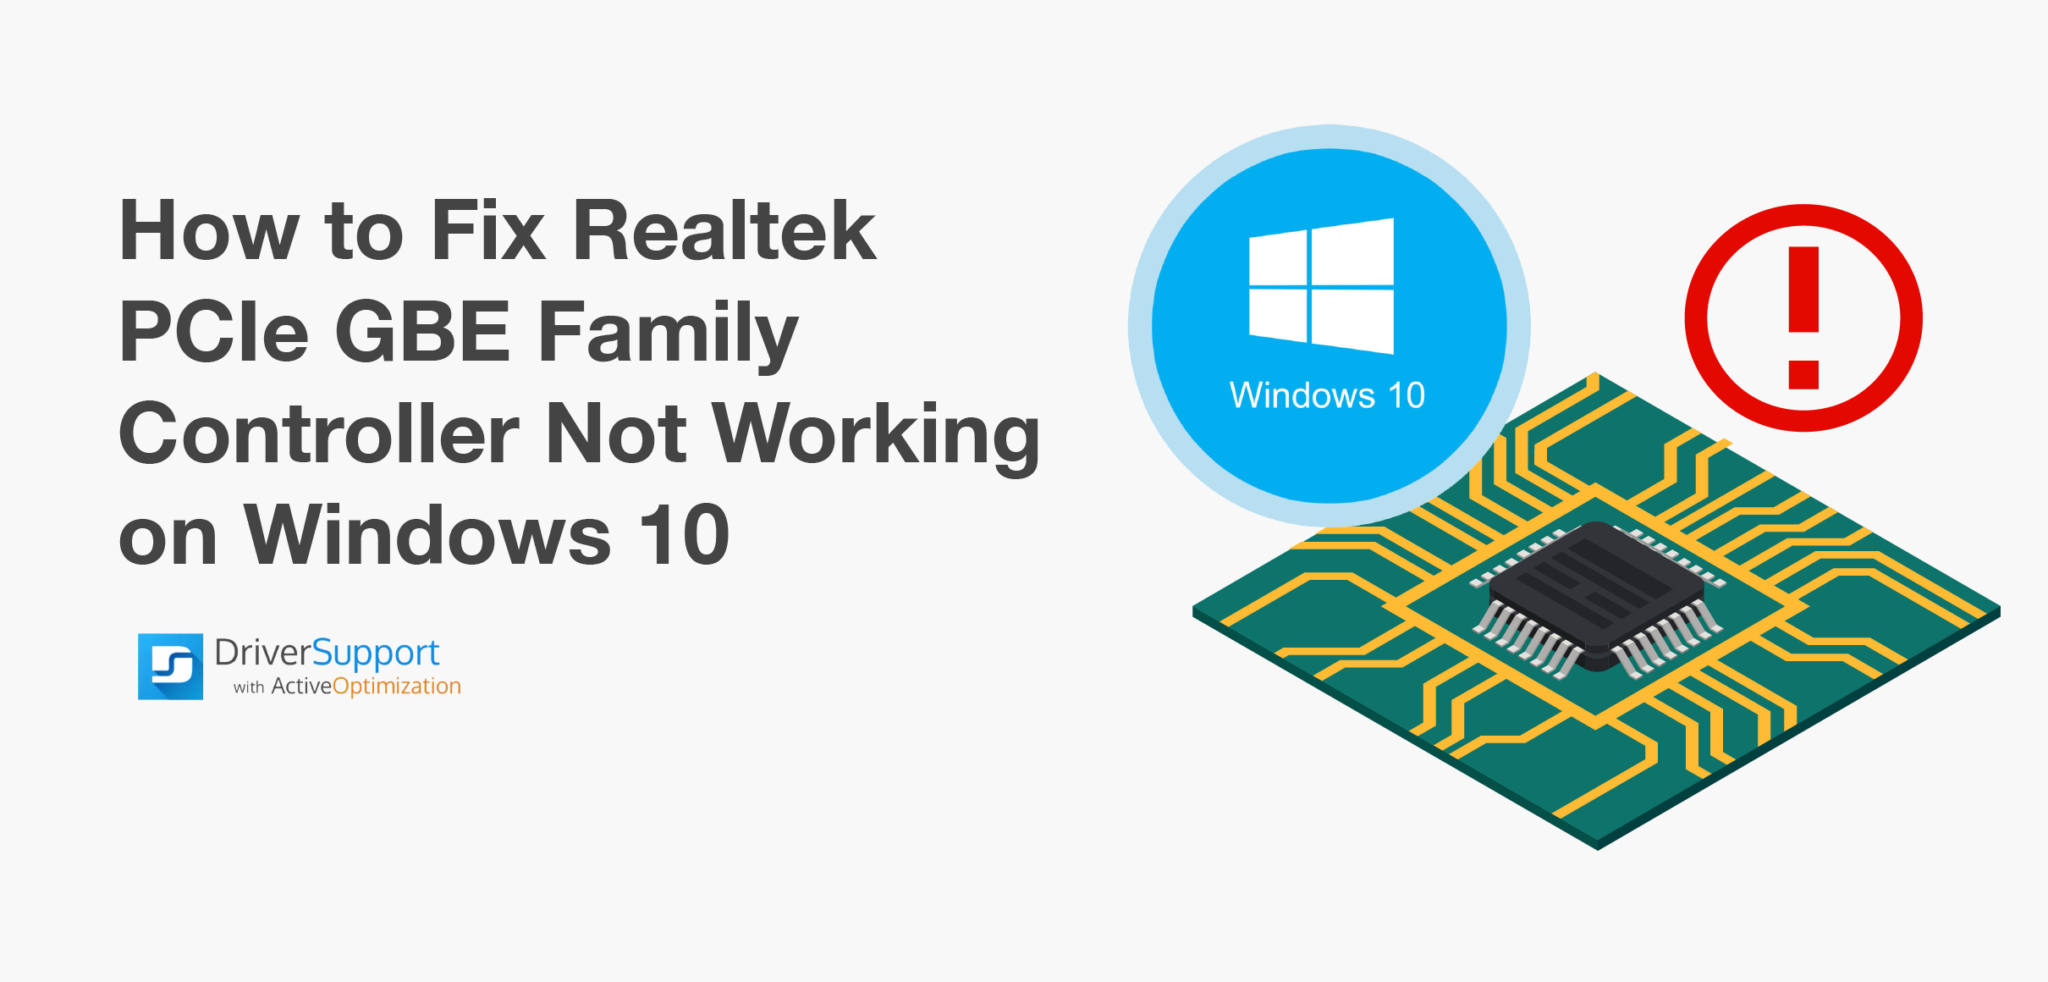 Fix Realtek PCIe GBE Family Controller Not Working on Windows 10